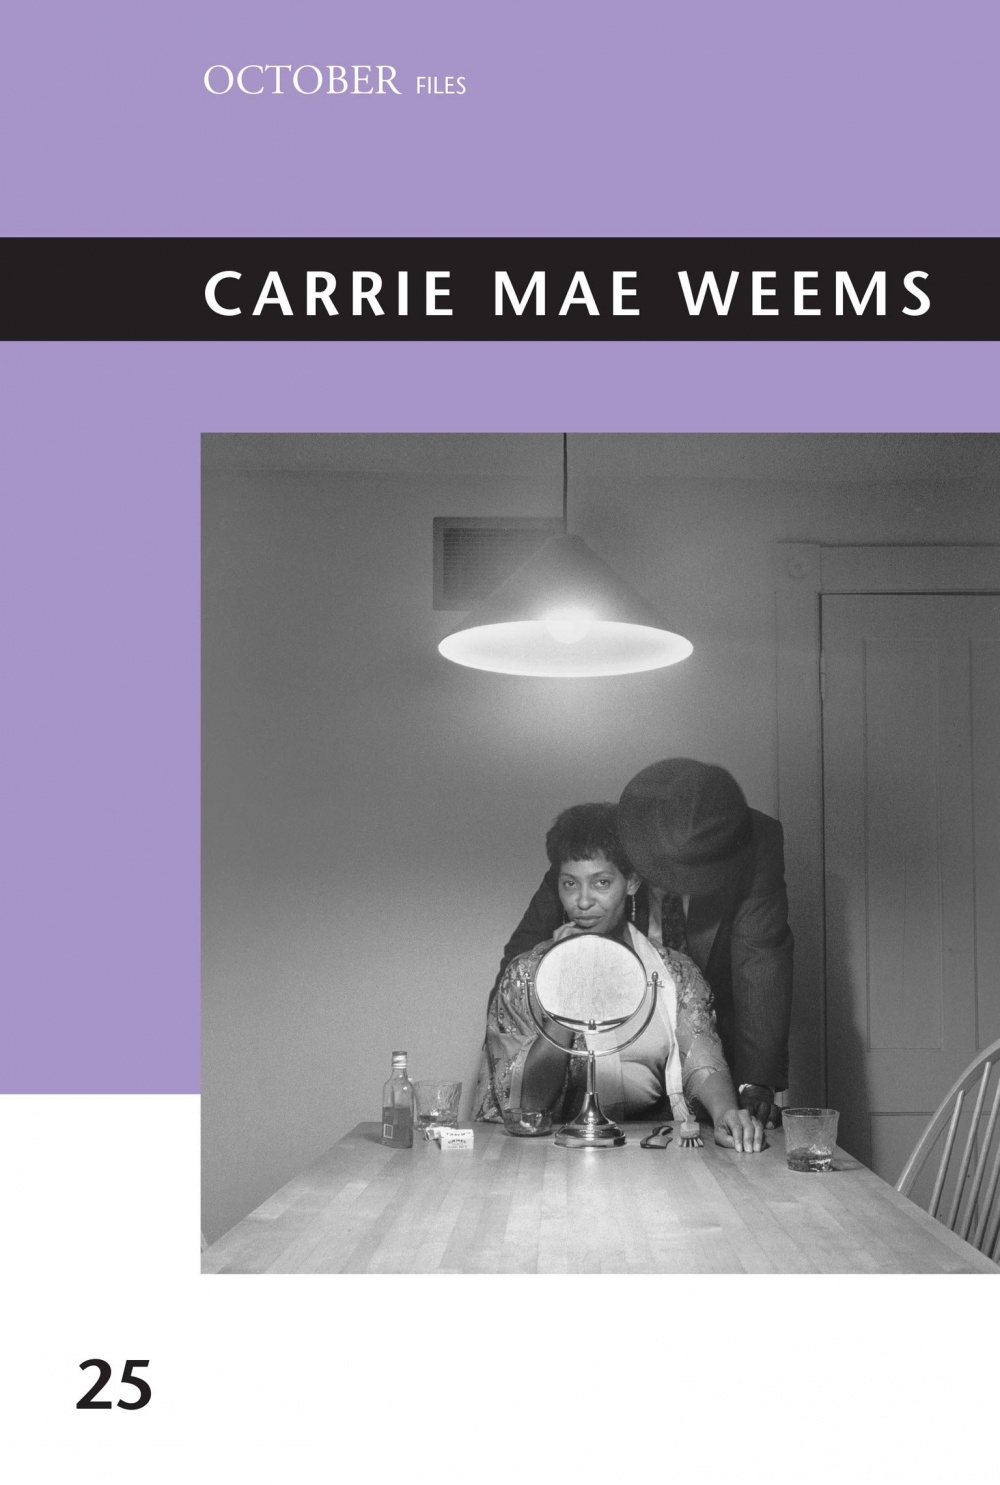 October Files: Carrie Mae Weems